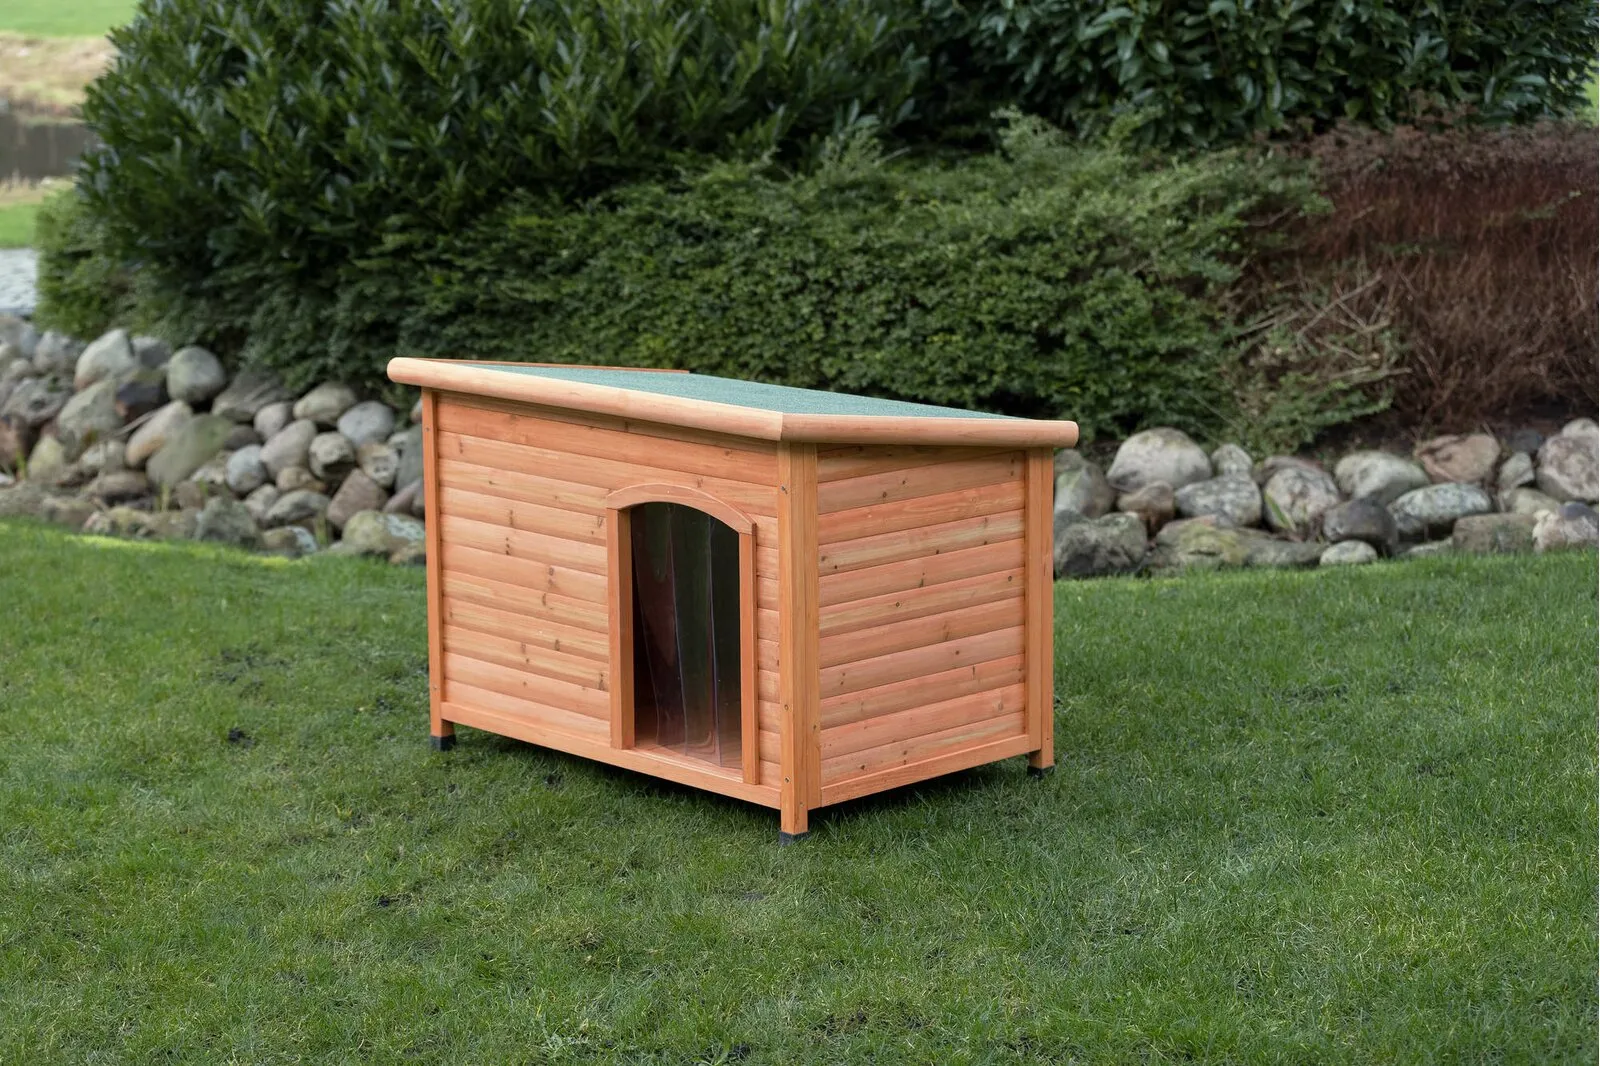 How to Insulate a Dog House? | Tips & Guide